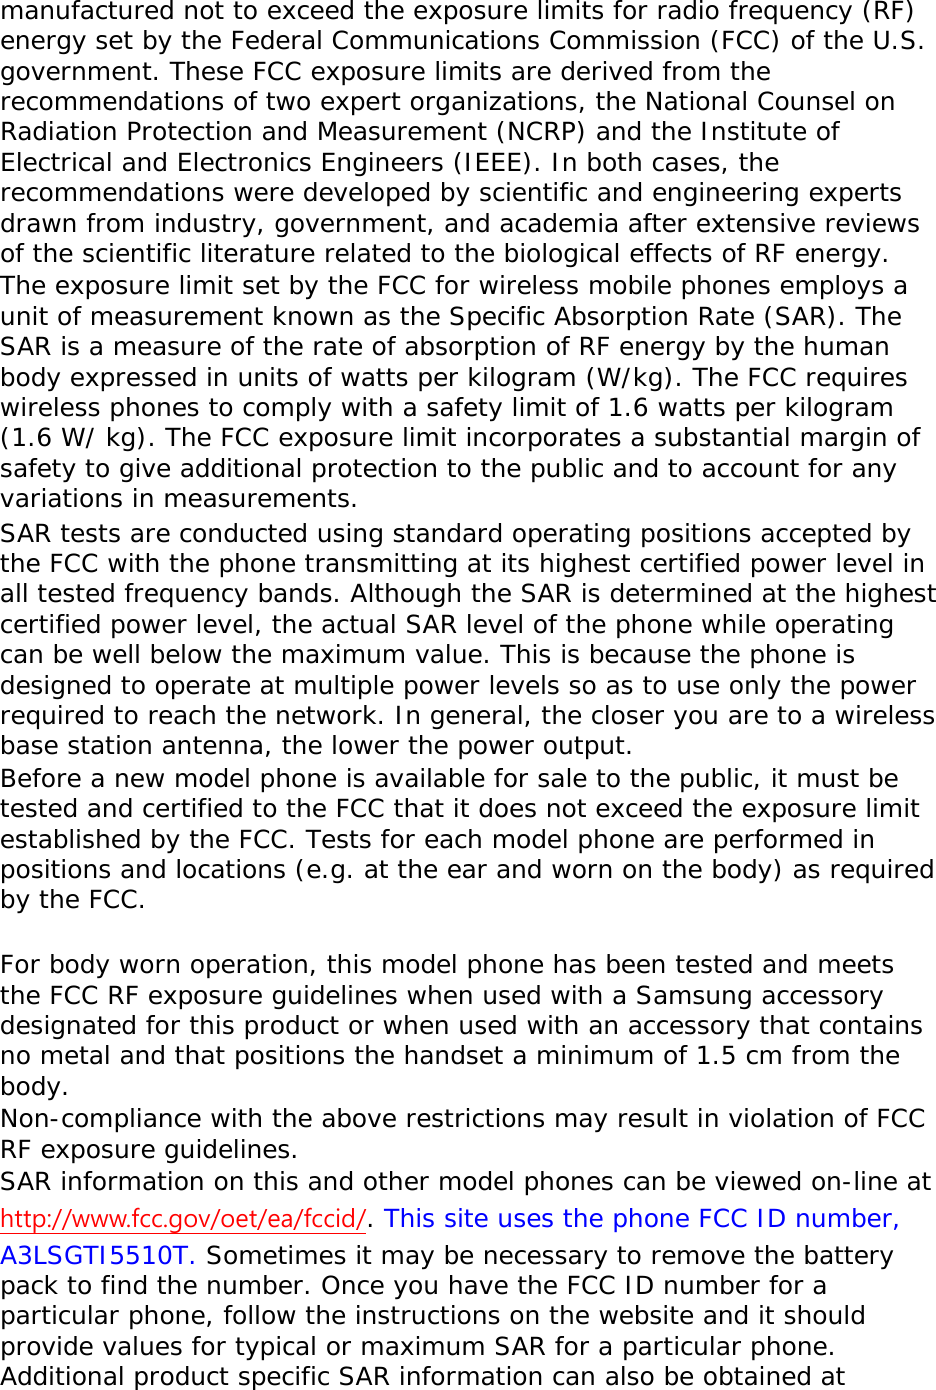 manufactured not to exceed the exposure limits for radio frequency (RF) energy set by the Federal Communications Commission (FCC) of the U.S. government. These FCC exposure limits are derived from the recommendations of two expert organizations, the National Counsel on Radiation Protection and Measurement (NCRP) and the Institute of Electrical and Electronics Engineers (IEEE). In both cases, the recommendations were developed by scientific and engineering experts drawn from industry, government, and academia after extensive reviews of the scientific literature related to the biological effects of RF energy. The exposure limit set by the FCC for wireless mobile phones employs a unit of measurement known as the Specific Absorption Rate (SAR). The SAR is a measure of the rate of absorption of RF energy by the human body expressed in units of watts per kilogram (W/kg). The FCC requires wireless phones to comply with a safety limit of 1.6 watts per kilogram (1.6 W/ kg). The FCC exposure limit incorporates a substantial margin of safety to give additional protection to the public and to account for any variations in measurements. SAR tests are conducted using standard operating positions accepted by the FCC with the phone transmitting at its highest certified power level in all tested frequency bands. Although the SAR is determined at the highest certified power level, the actual SAR level of the phone while operating can be well below the maximum value. This is because the phone is designed to operate at multiple power levels so as to use only the power required to reach the network. In general, the closer you are to a wireless base station antenna, the lower the power output. Before a new model phone is available for sale to the public, it must be tested and certified to the FCC that it does not exceed the exposure limit established by the FCC. Tests for each model phone are performed in positions and locations (e.g. at the ear and worn on the body) as required by the FCC.    For body worn operation, this model phone has been tested and meets the FCC RF exposure guidelines when used with a Samsung accessory designated for this product or when used with an accessory that contains no metal and that positions the handset a minimum of 1.5 cm from the body.  Non-compliance with the above restrictions may result in violation of FCC RF exposure guidelines. SAR information on this and other model phones can be viewed on-line at http://www.fcc.gov/oet/ea/fccid/. This site uses the phone FCC ID number, A3LSGTI5510T. Sometimes it may be necessary to remove the battery pack to find the number. Once you have the FCC ID number for a particular phone, follow the instructions on the website and it should provide values for typical or maximum SAR for a particular phone. Additional product specific SAR information can also be obtained at 